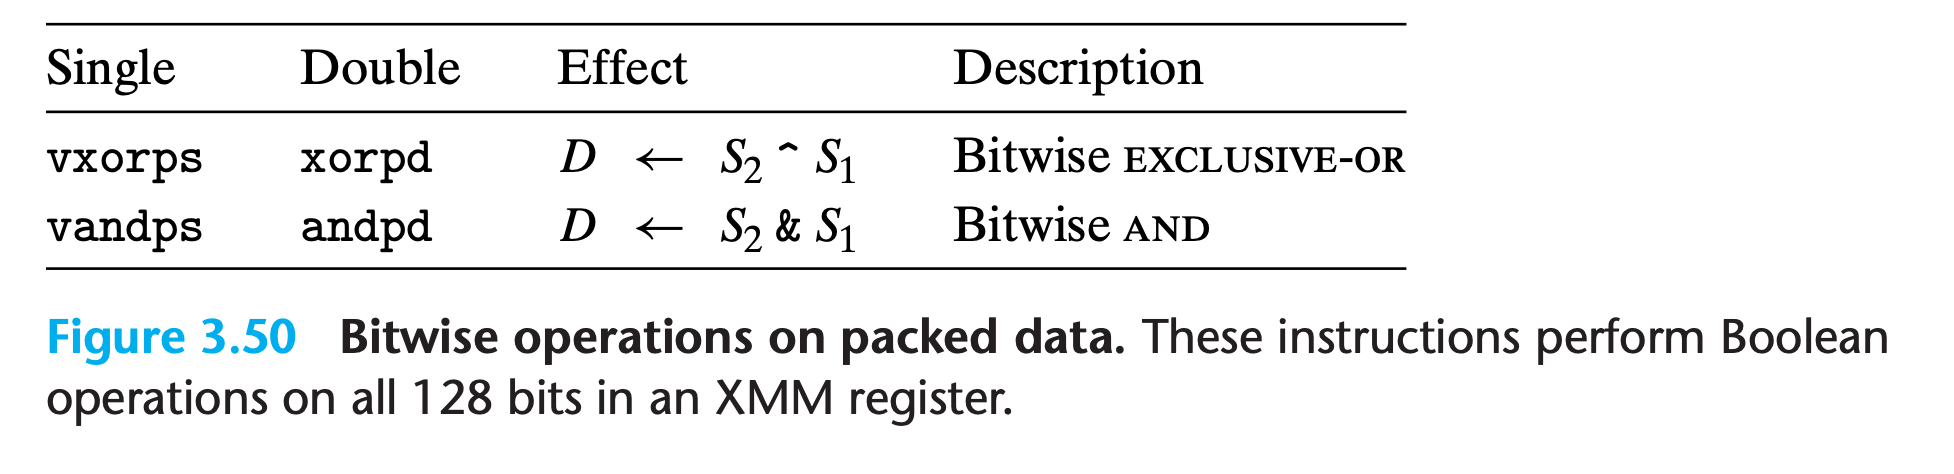 bitwise instructions